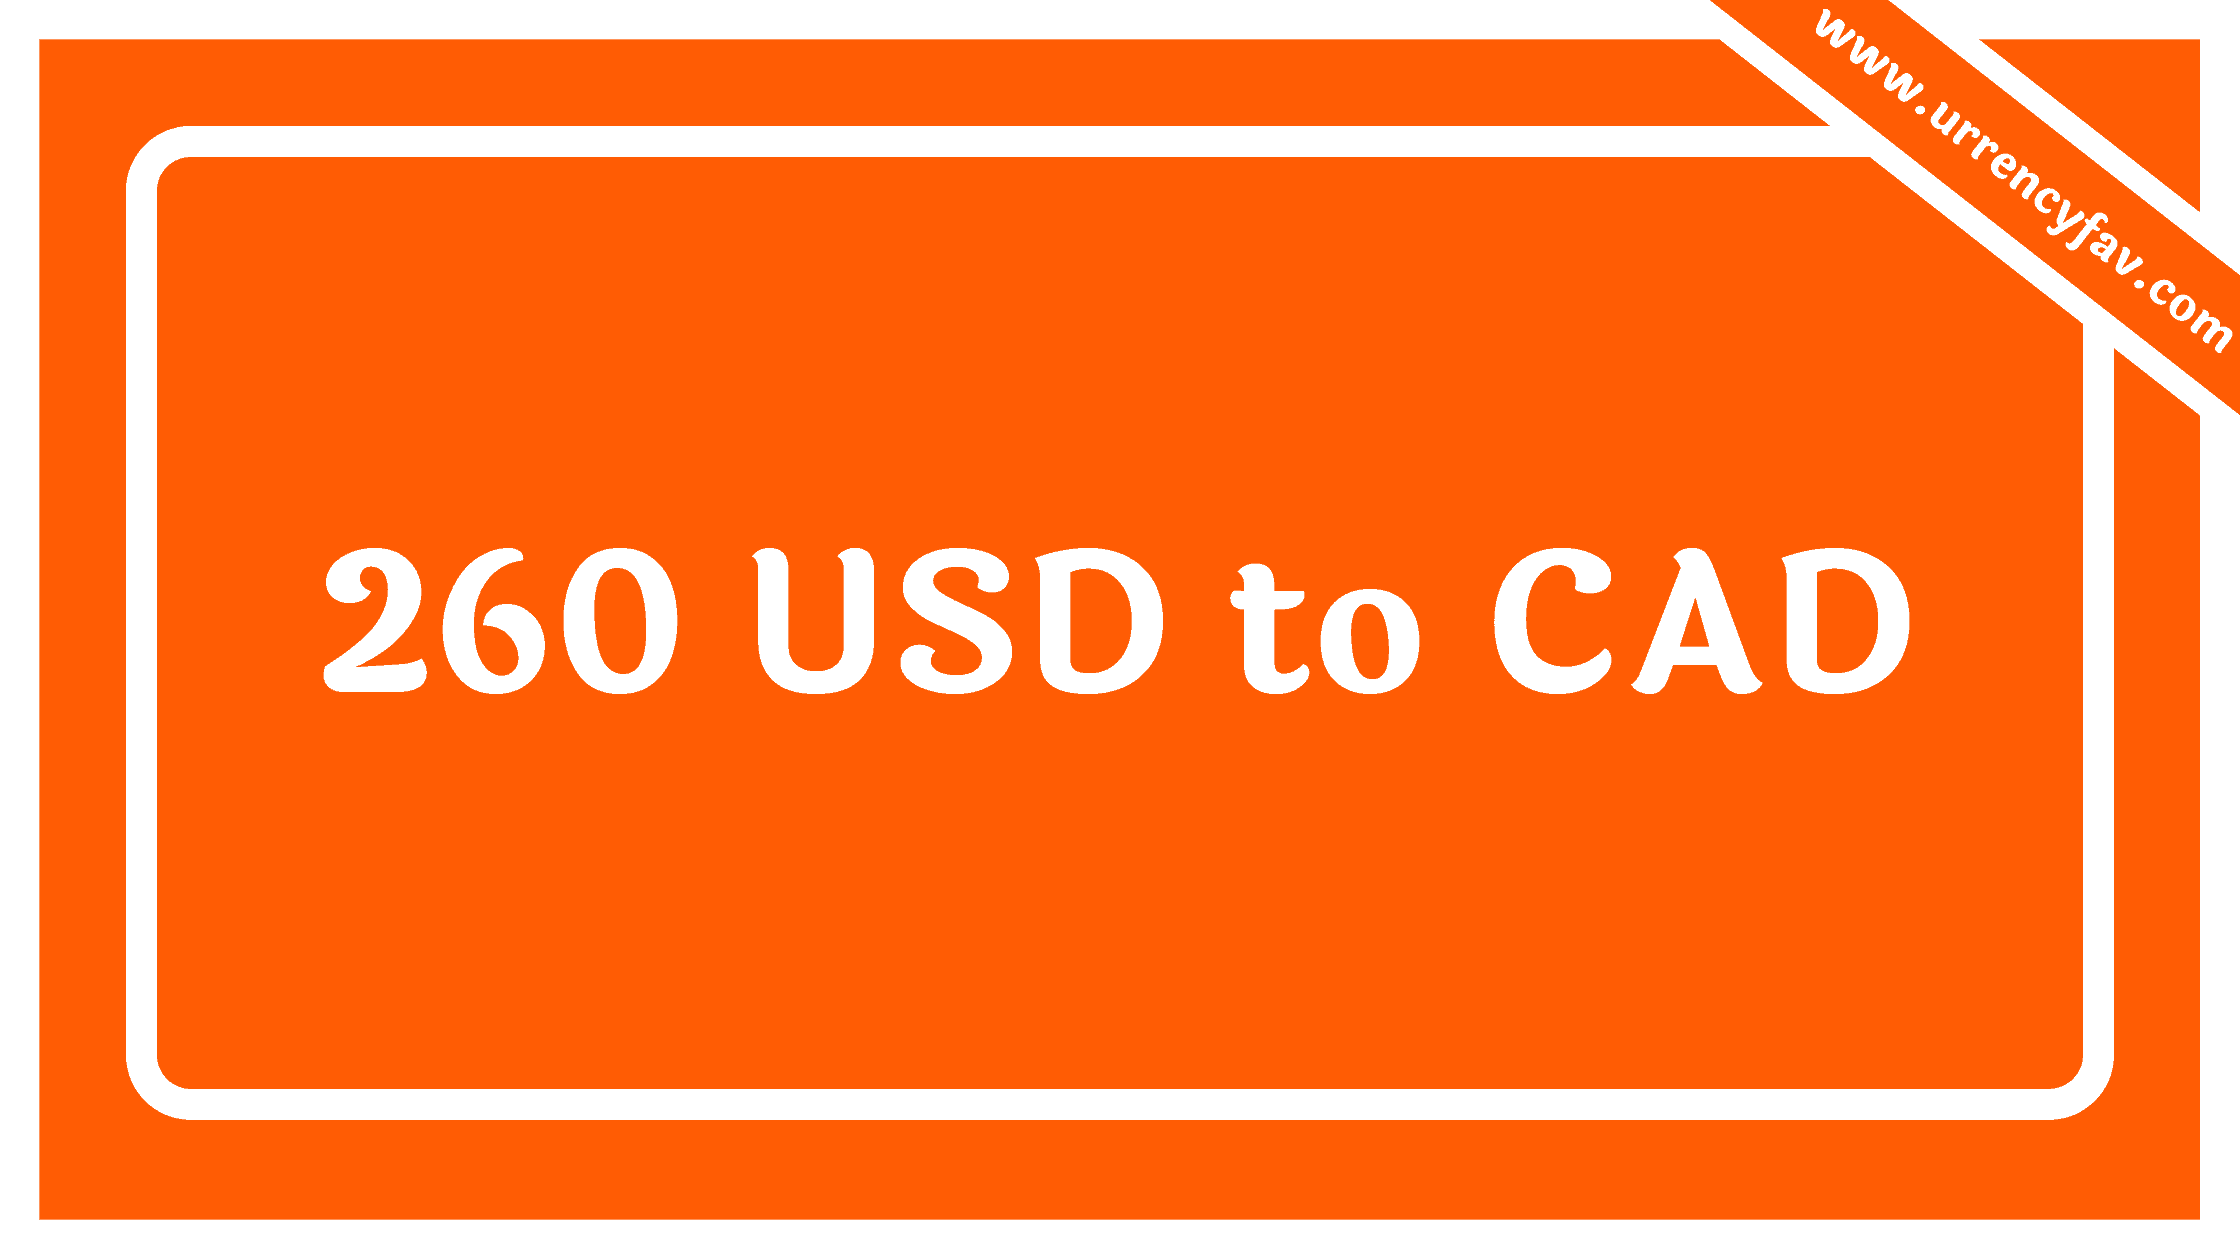 260 USD to CAD